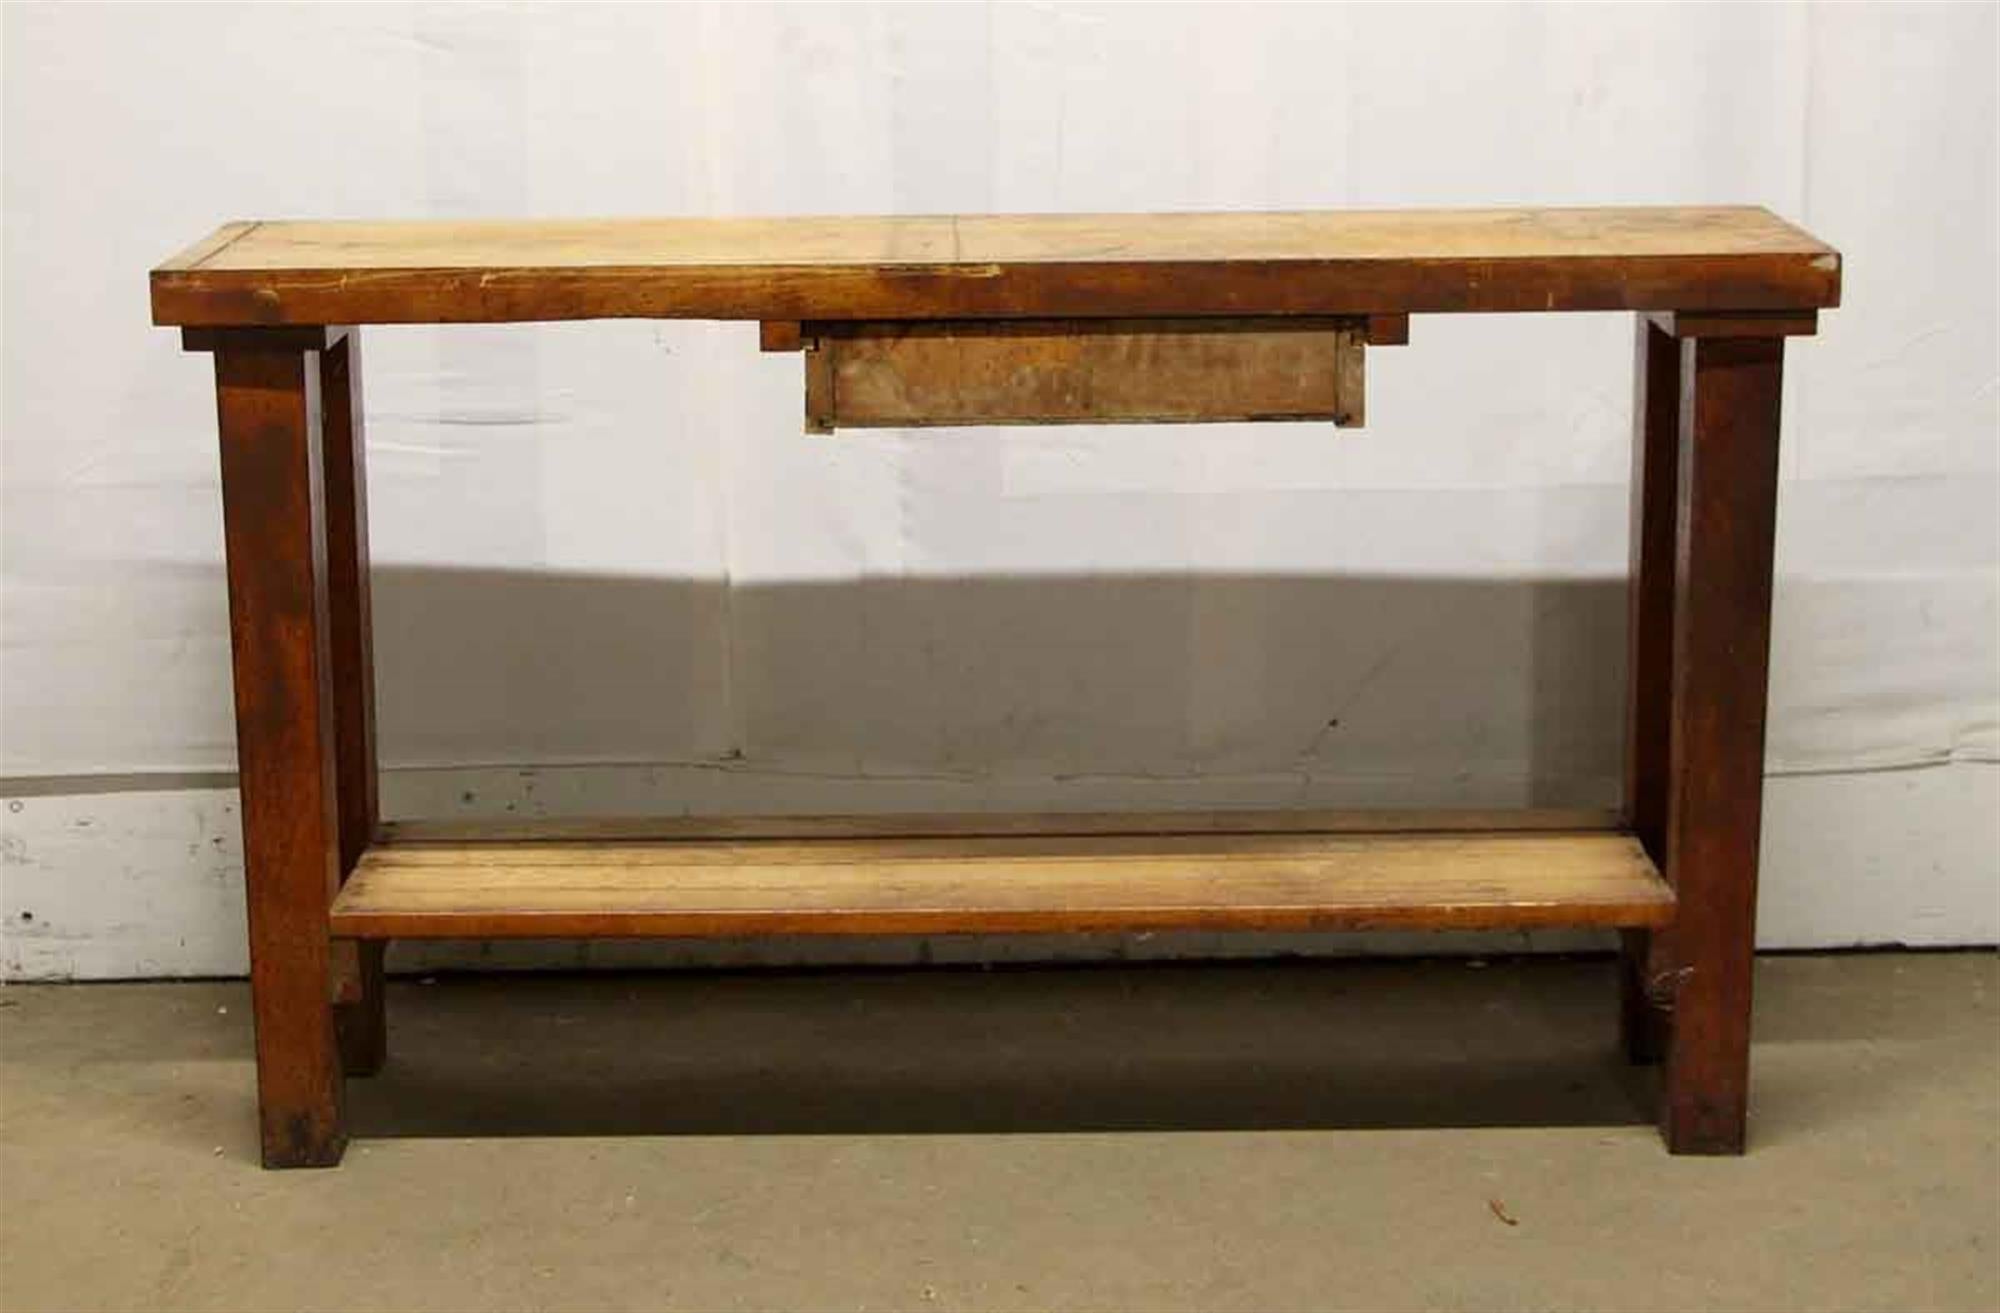 1950s Original Distressed Wood Work Bench with Drawer and Lower Shelf 2